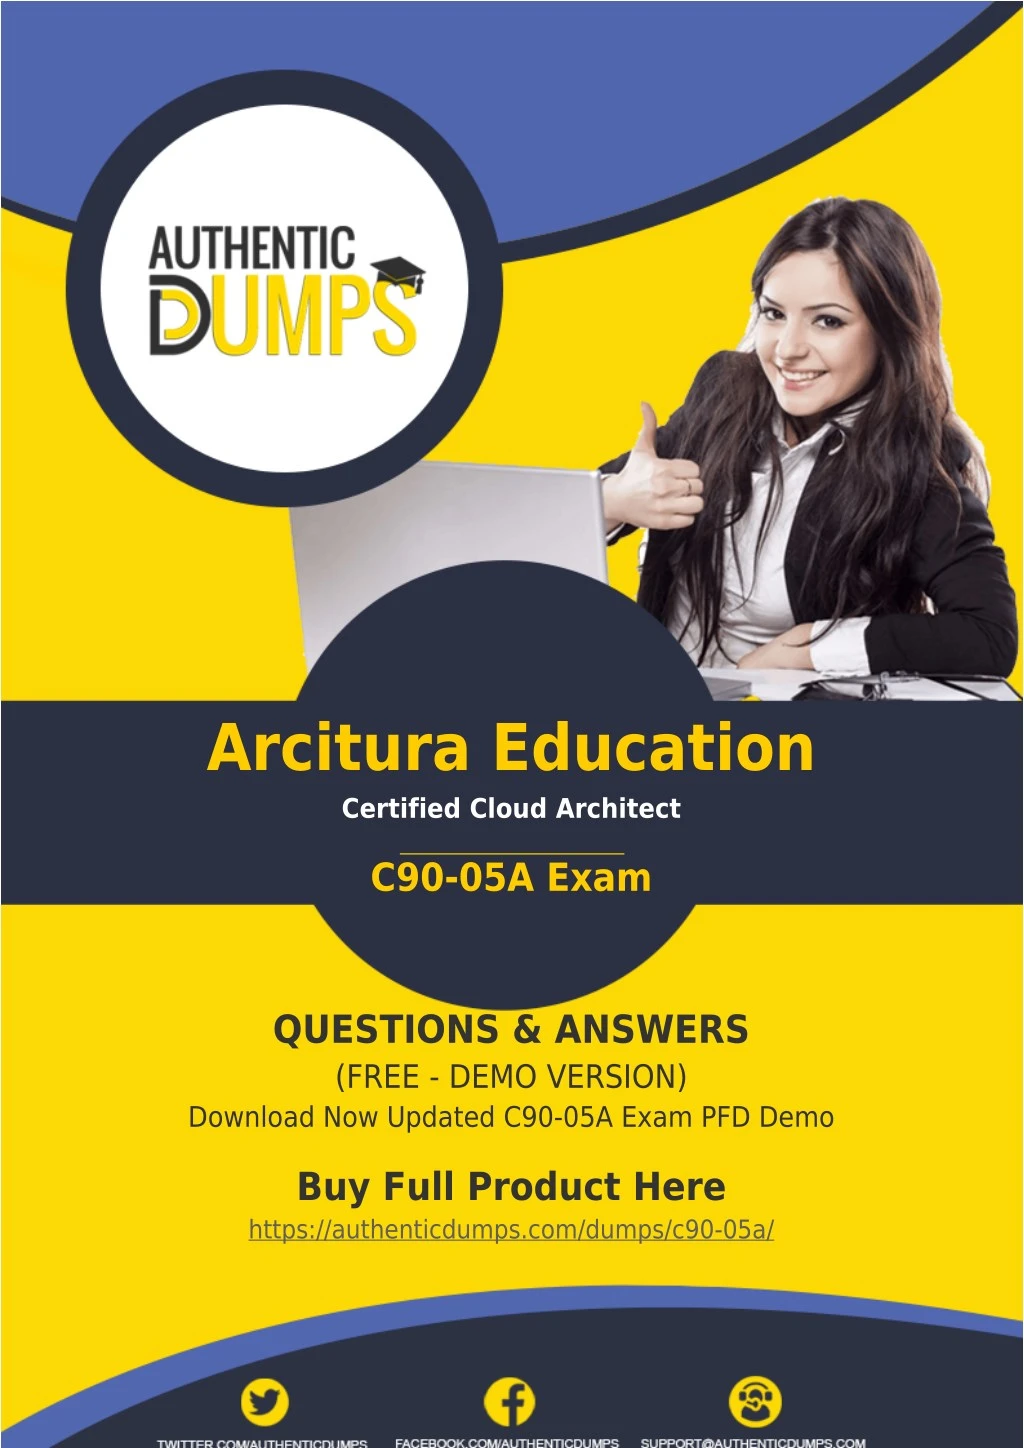 arcitura education certified cloud architect